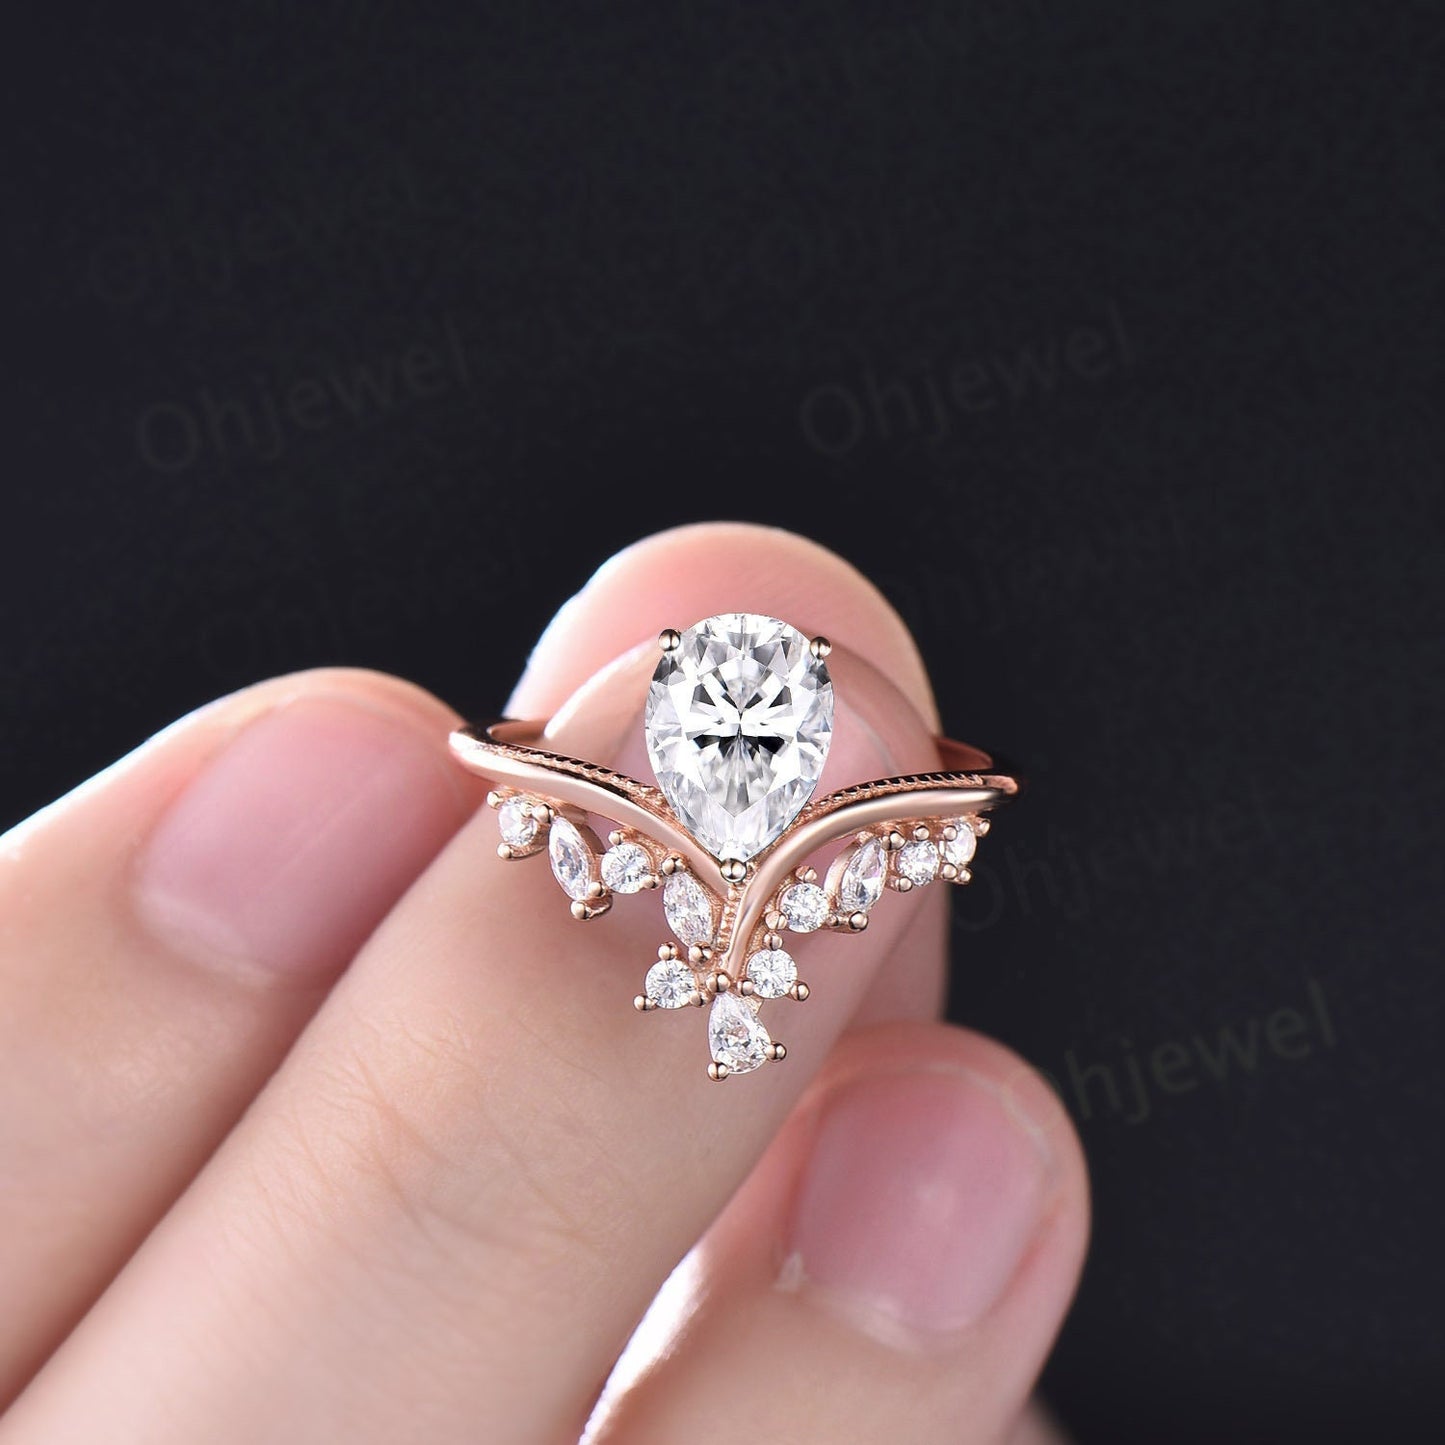 Vintage style pear shaped moissanite engagement ring solid 14k rose gold cluster marquise cut diamond ring women unique wedding promise ring